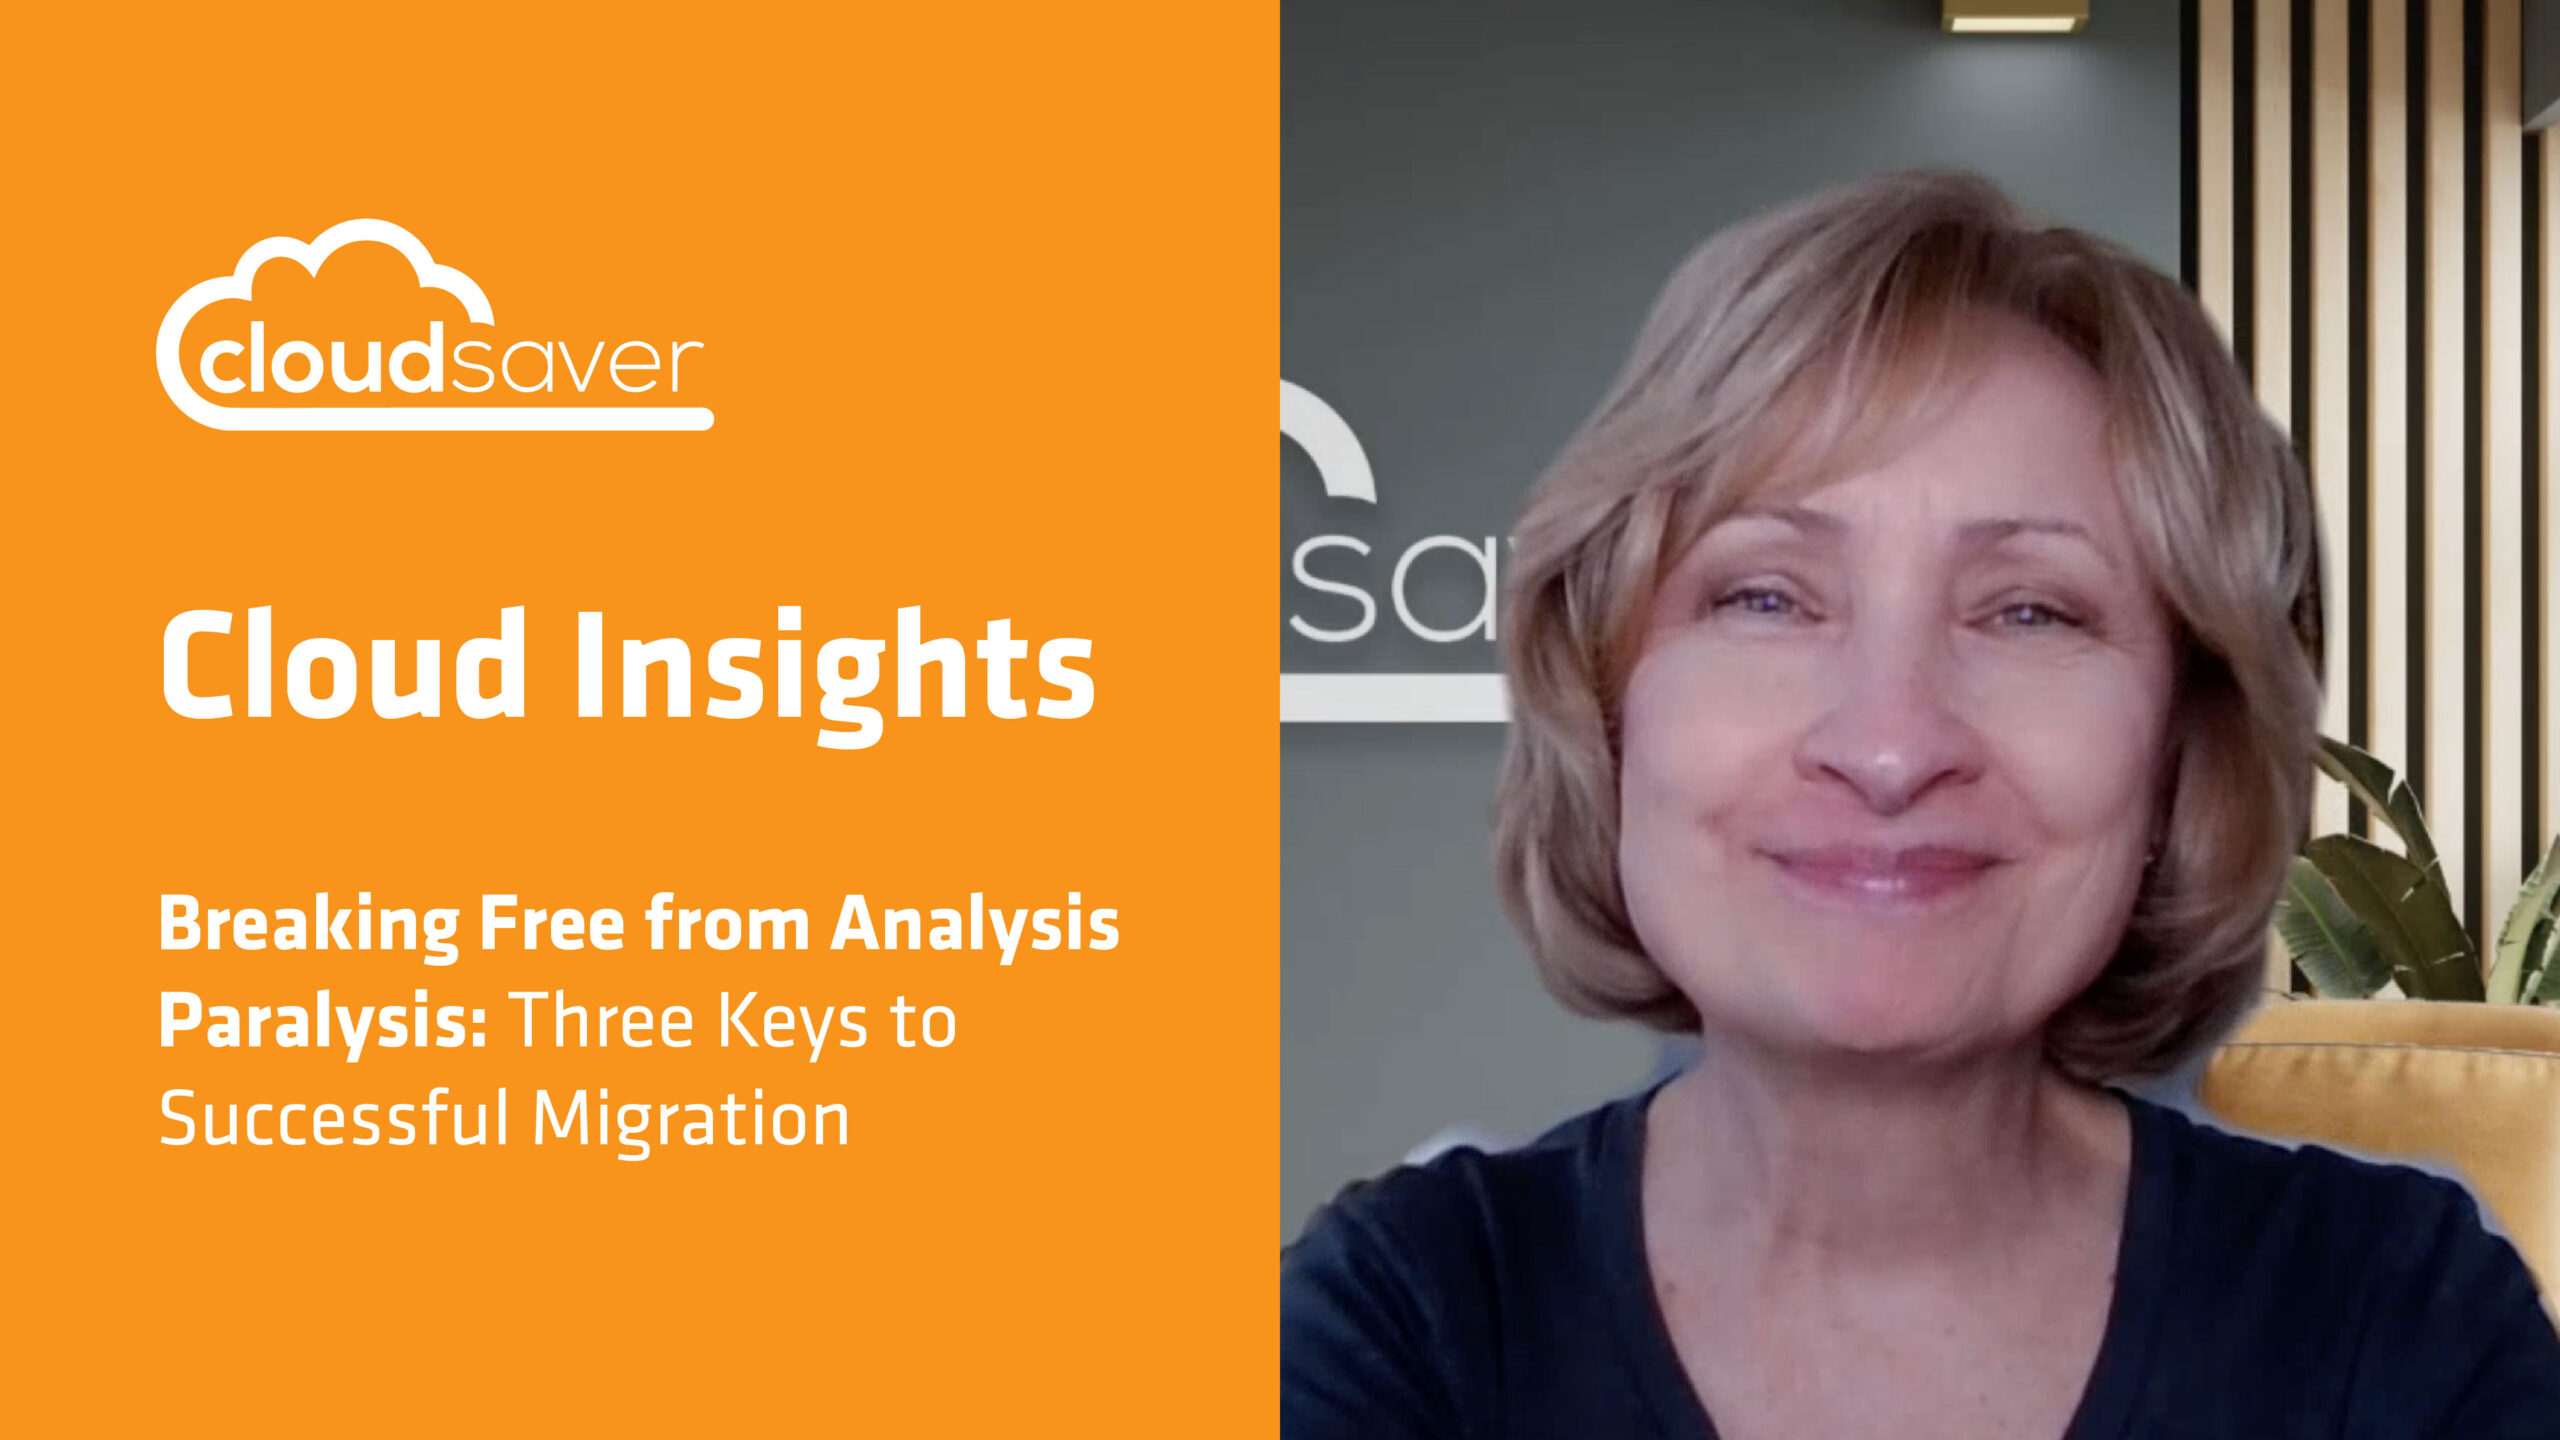 Breaking Free from Analysis Paralysis: Three Keys to Successful Migration